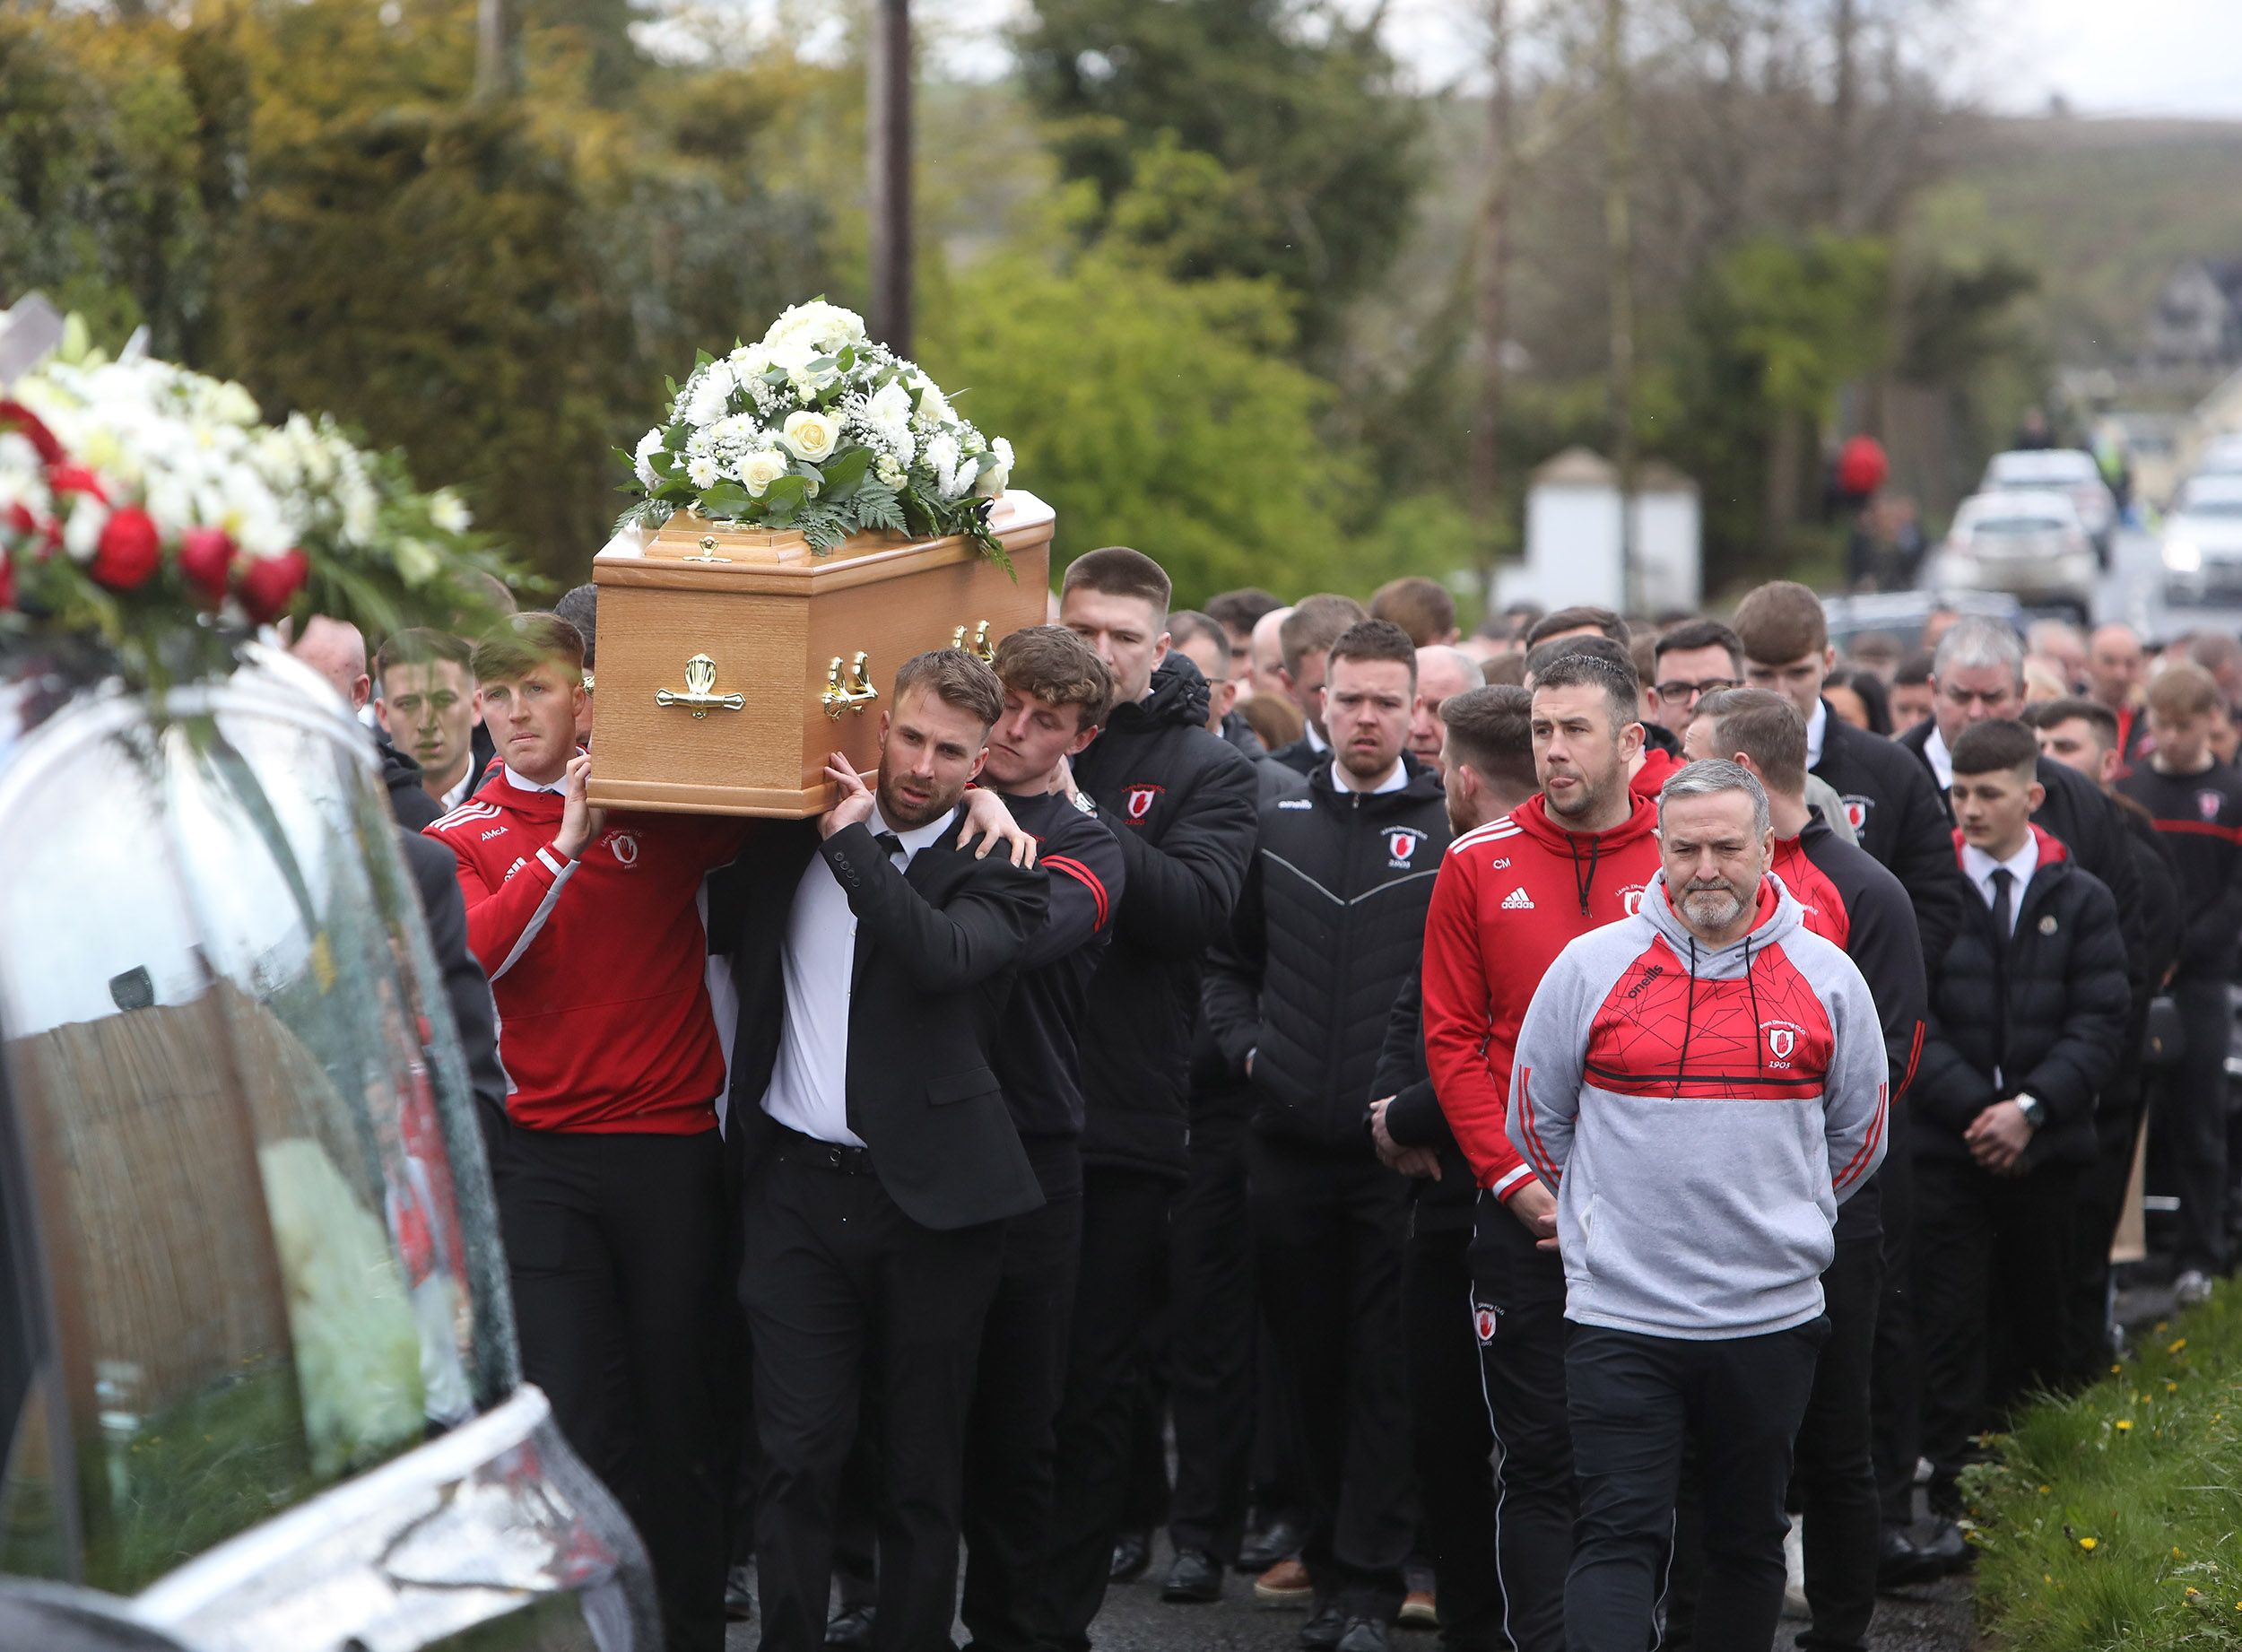 TRAGIC LOSS: The funeral of Ryan Straney took place on Saturday in Hannahstown